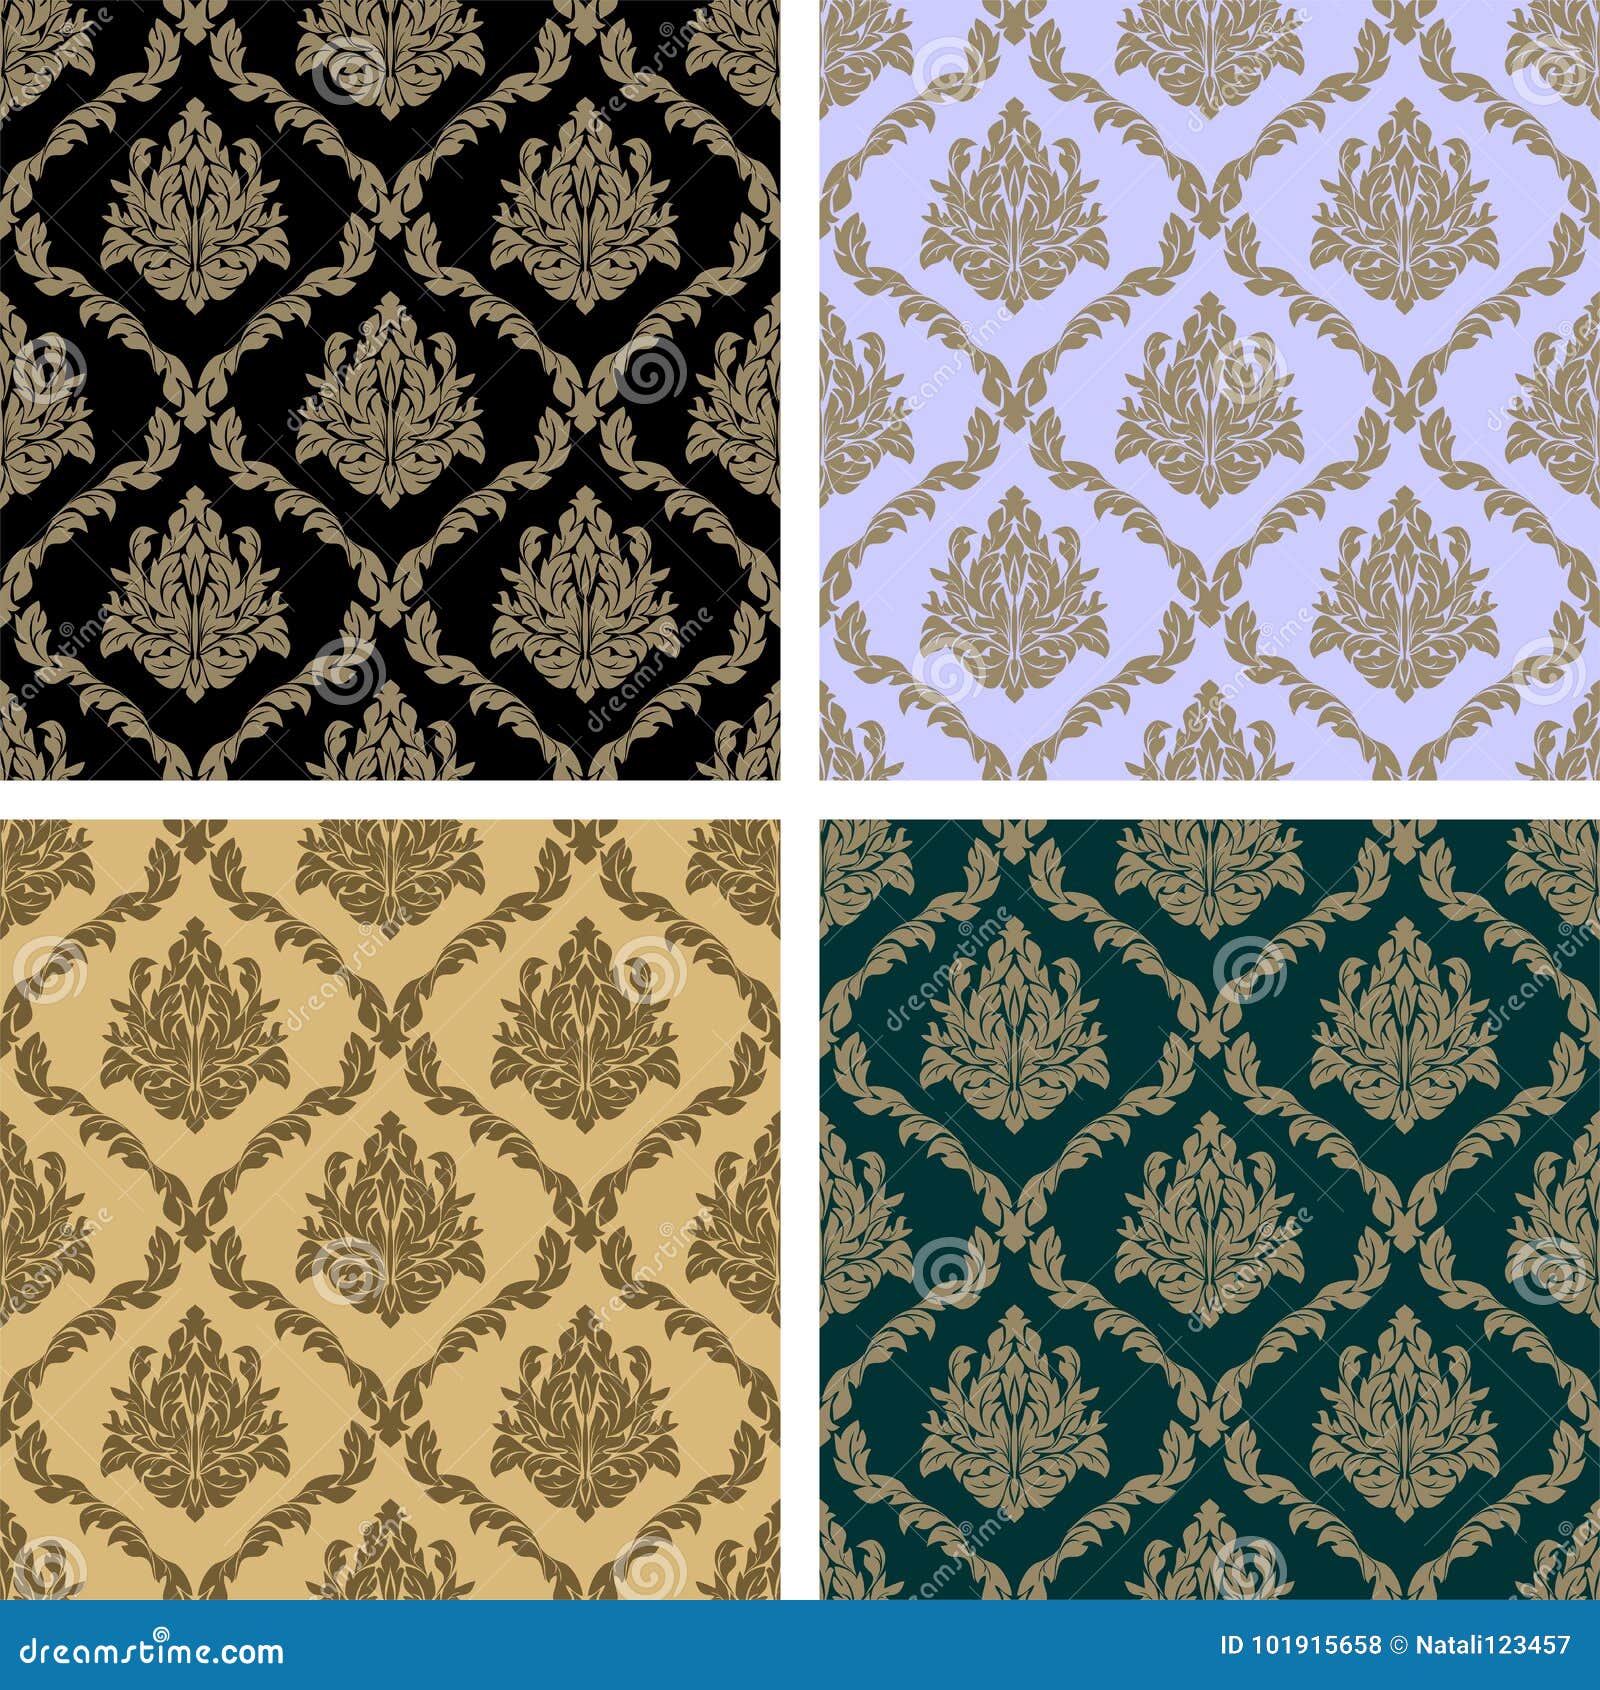 damask floral repeat pattern - set in four variants